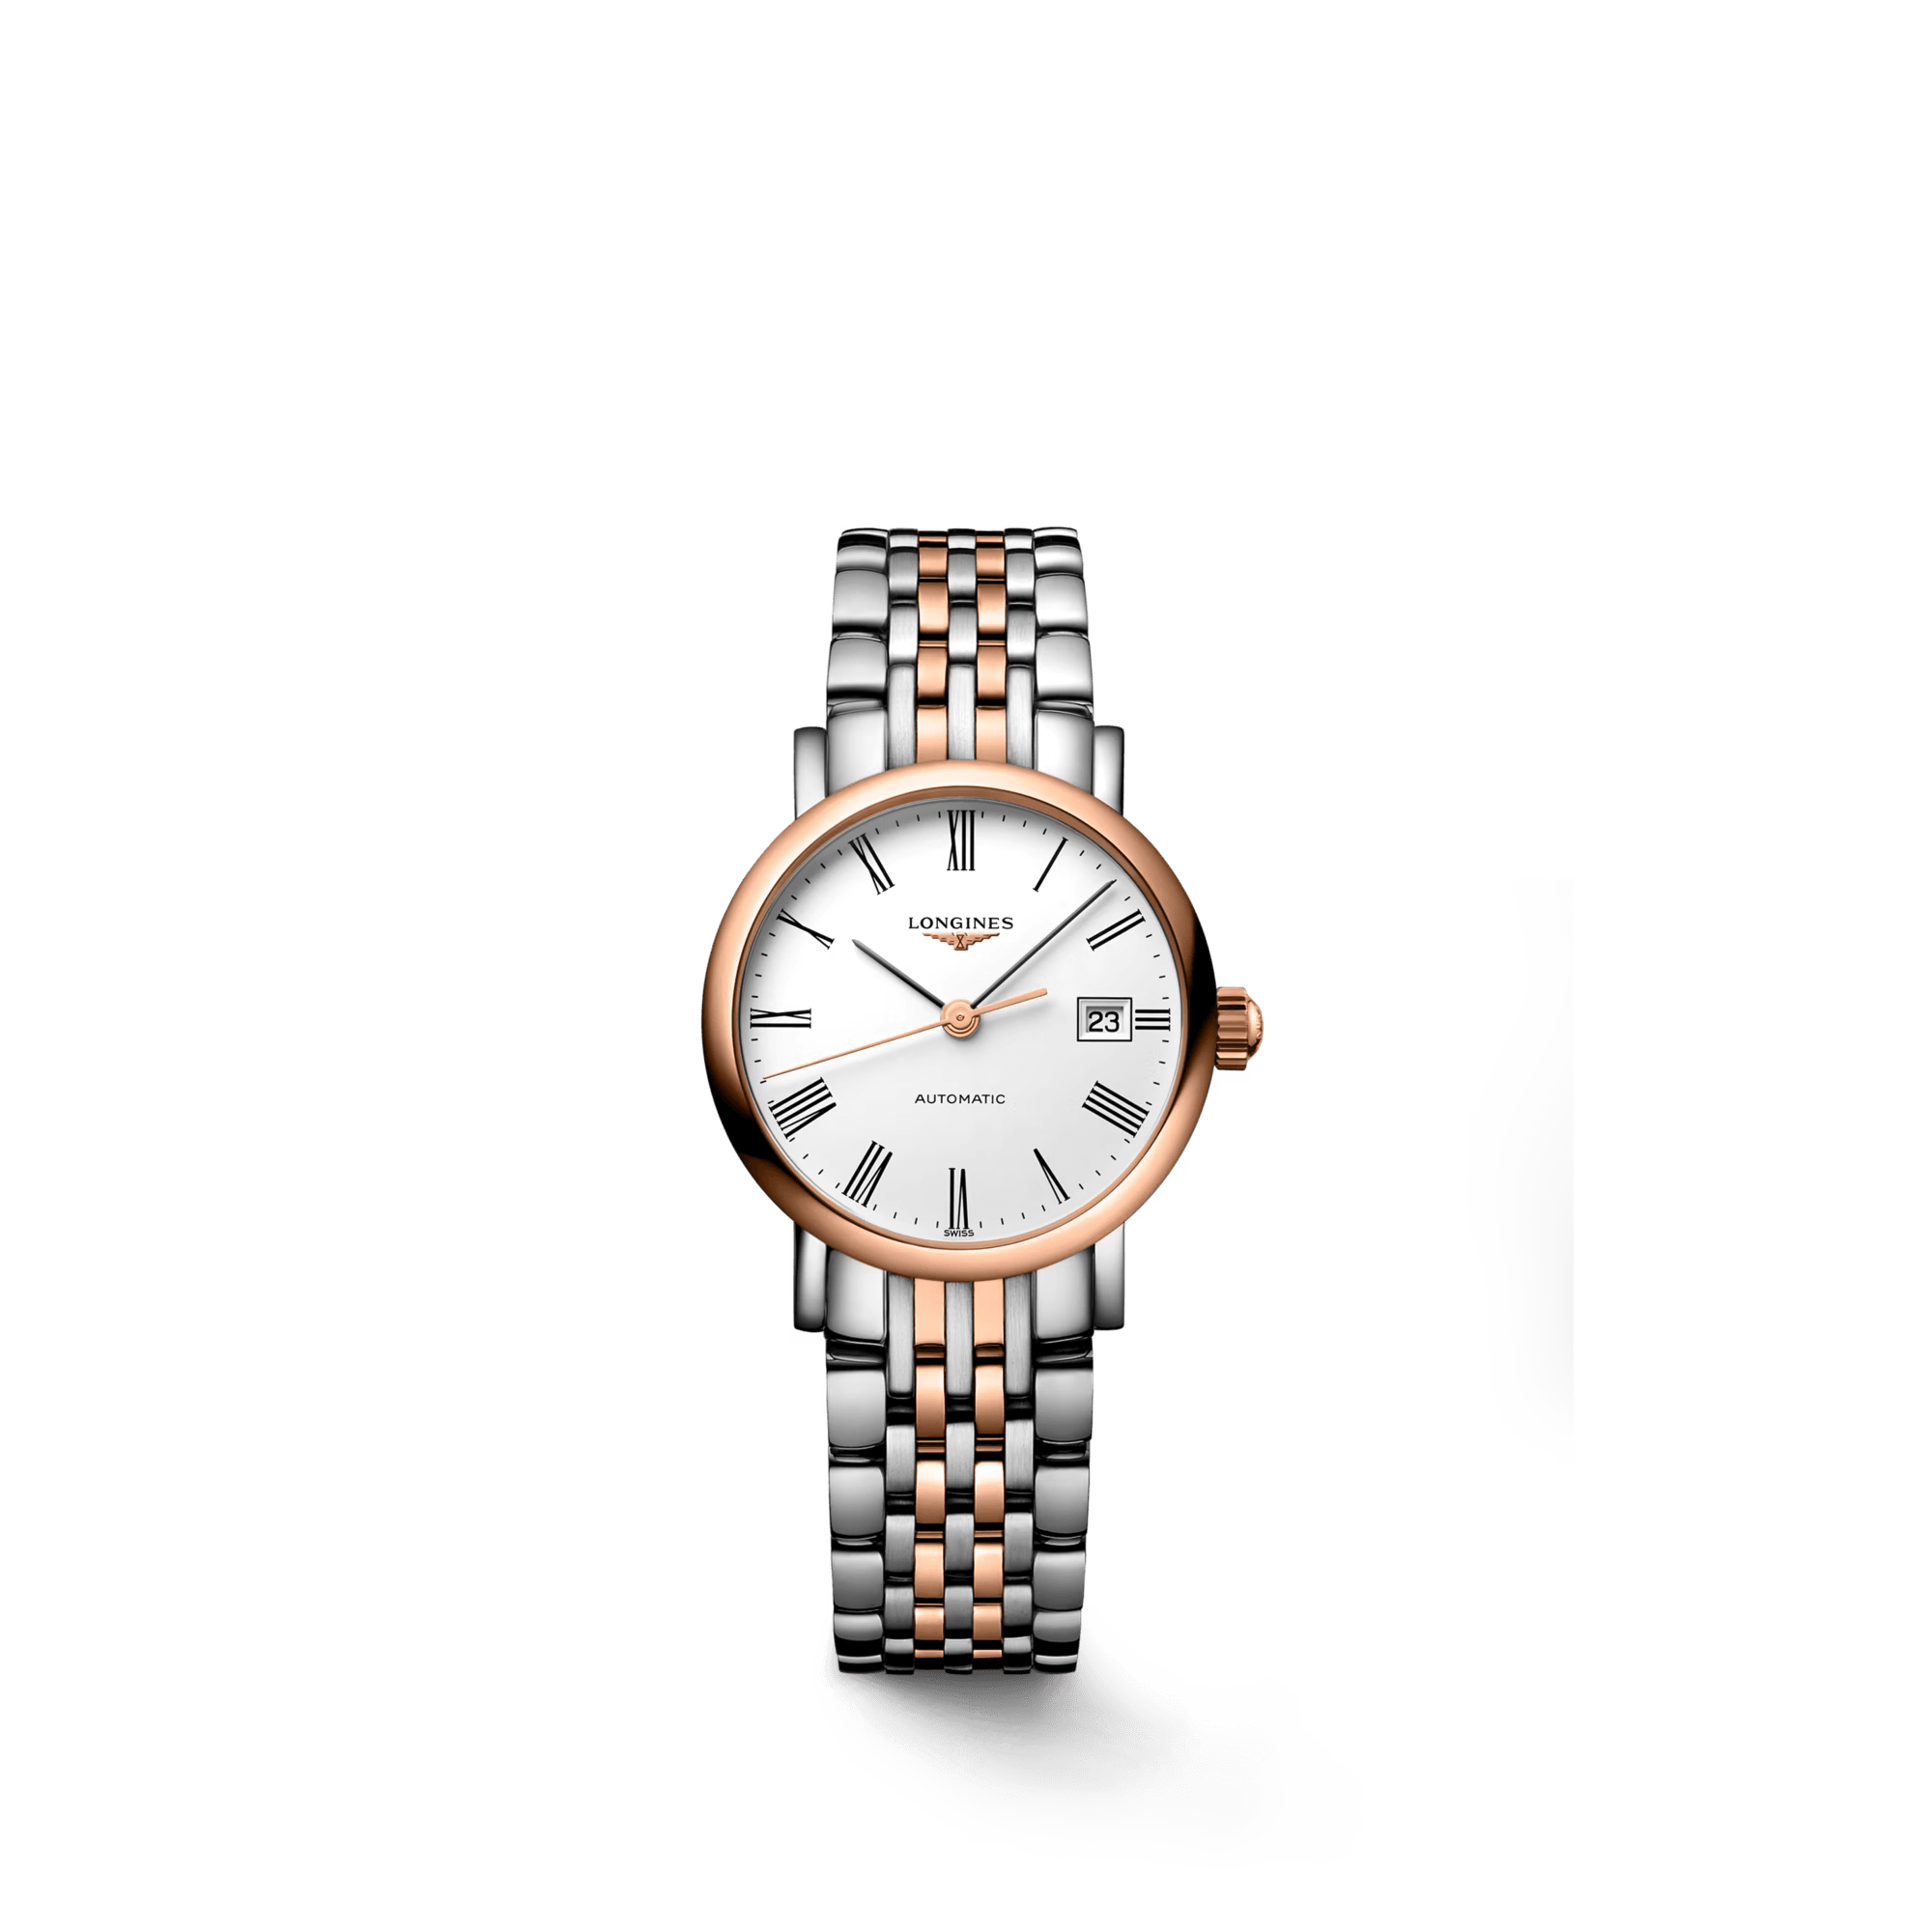 Longines The Longines Elegant Collection Automatic Women's Watch L43095117